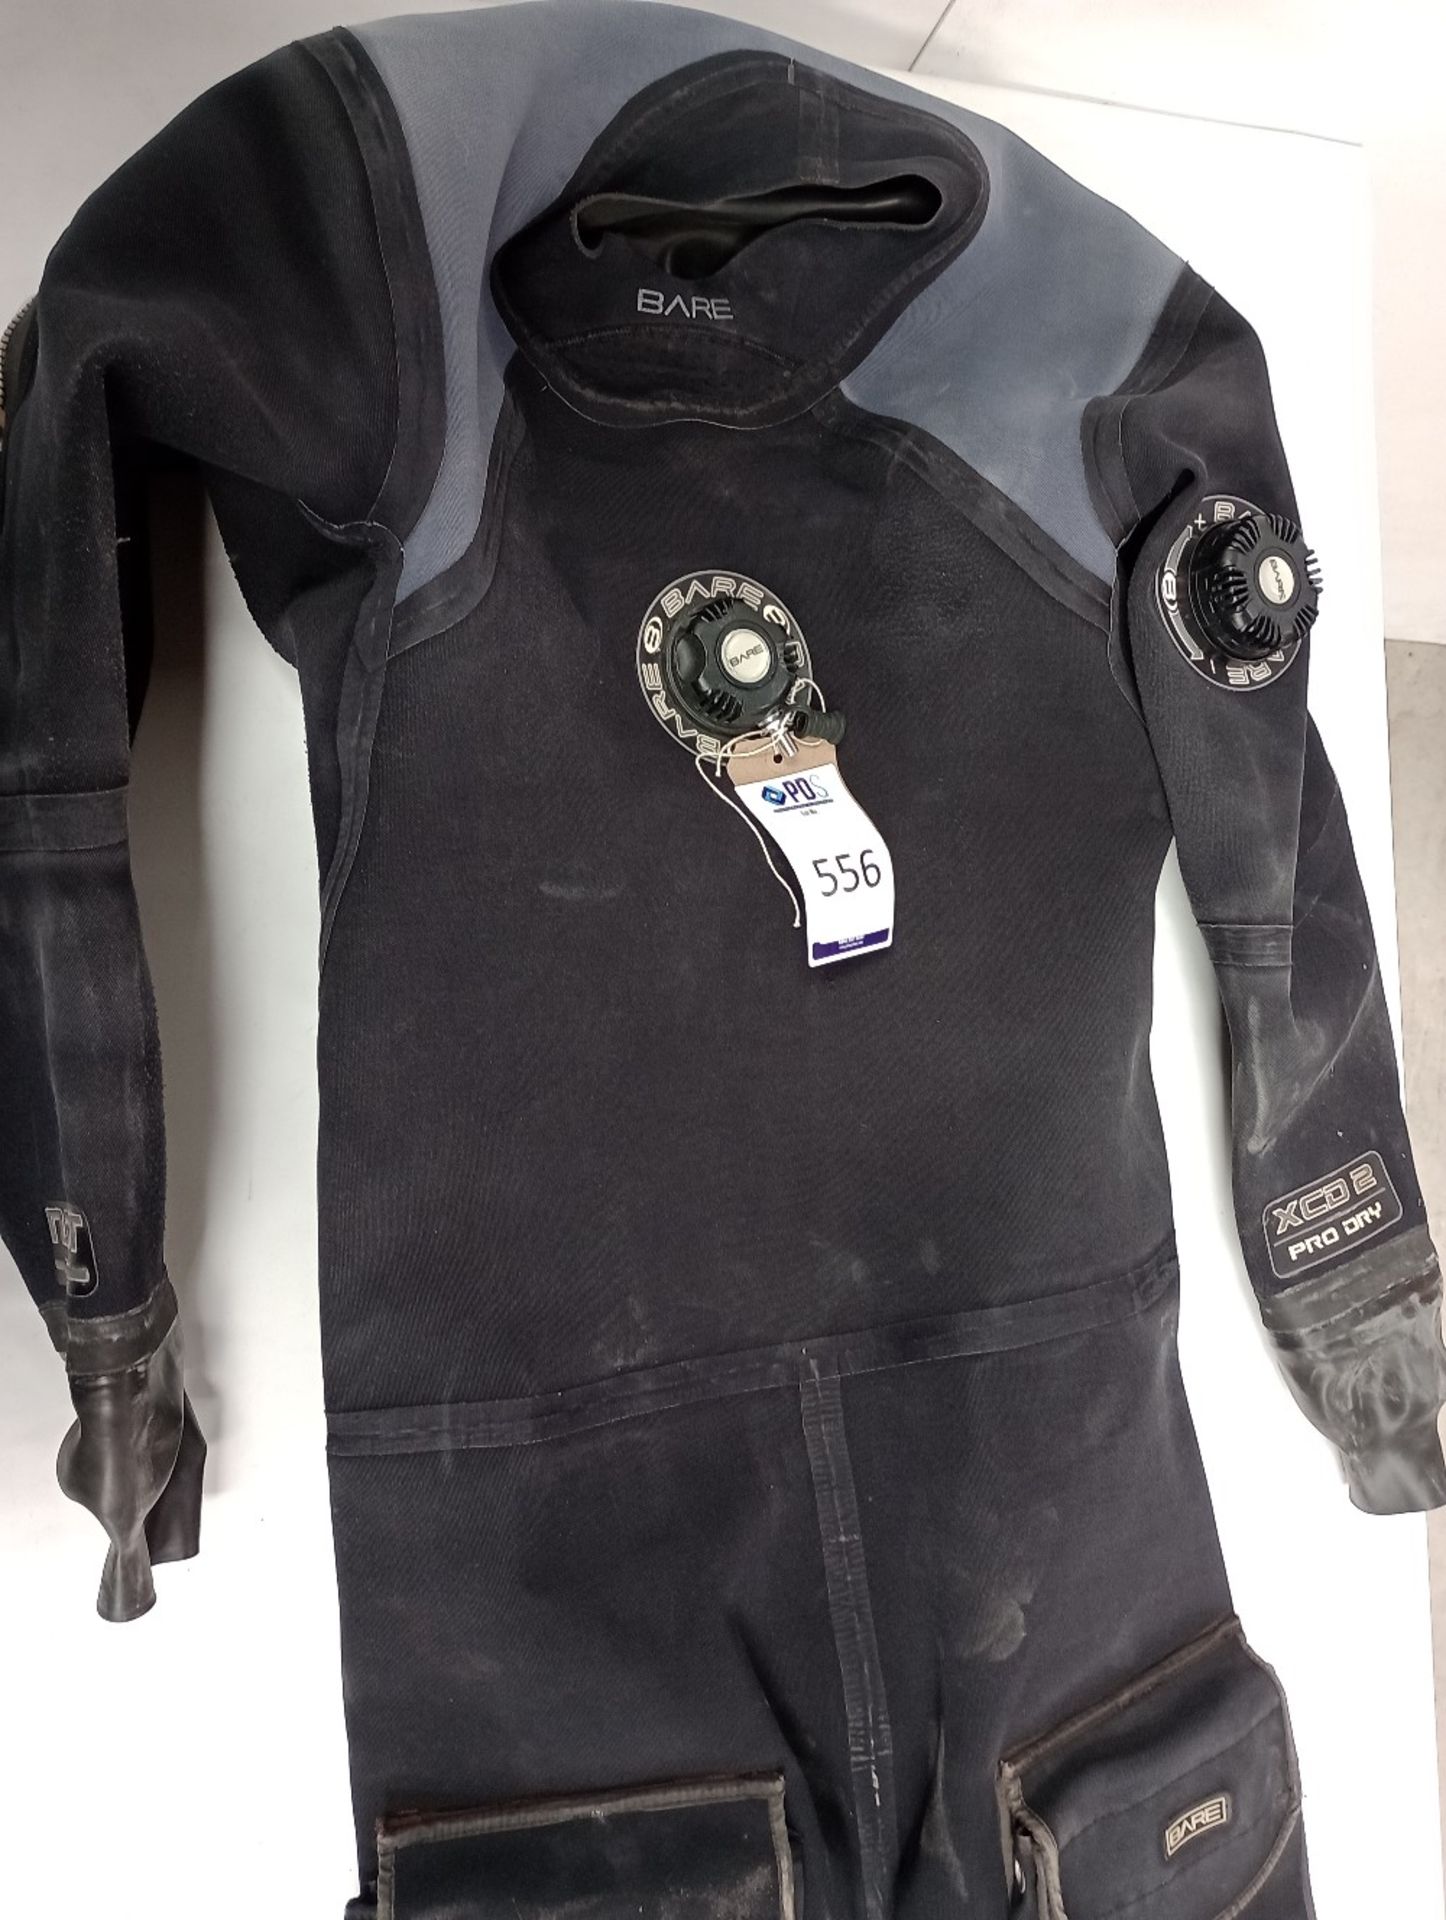 Bare XCD2 Drysuit, Serial No. W12871-09-00Q, Size Medium/Large Tall (Location: Brentwood. Please - Image 3 of 6